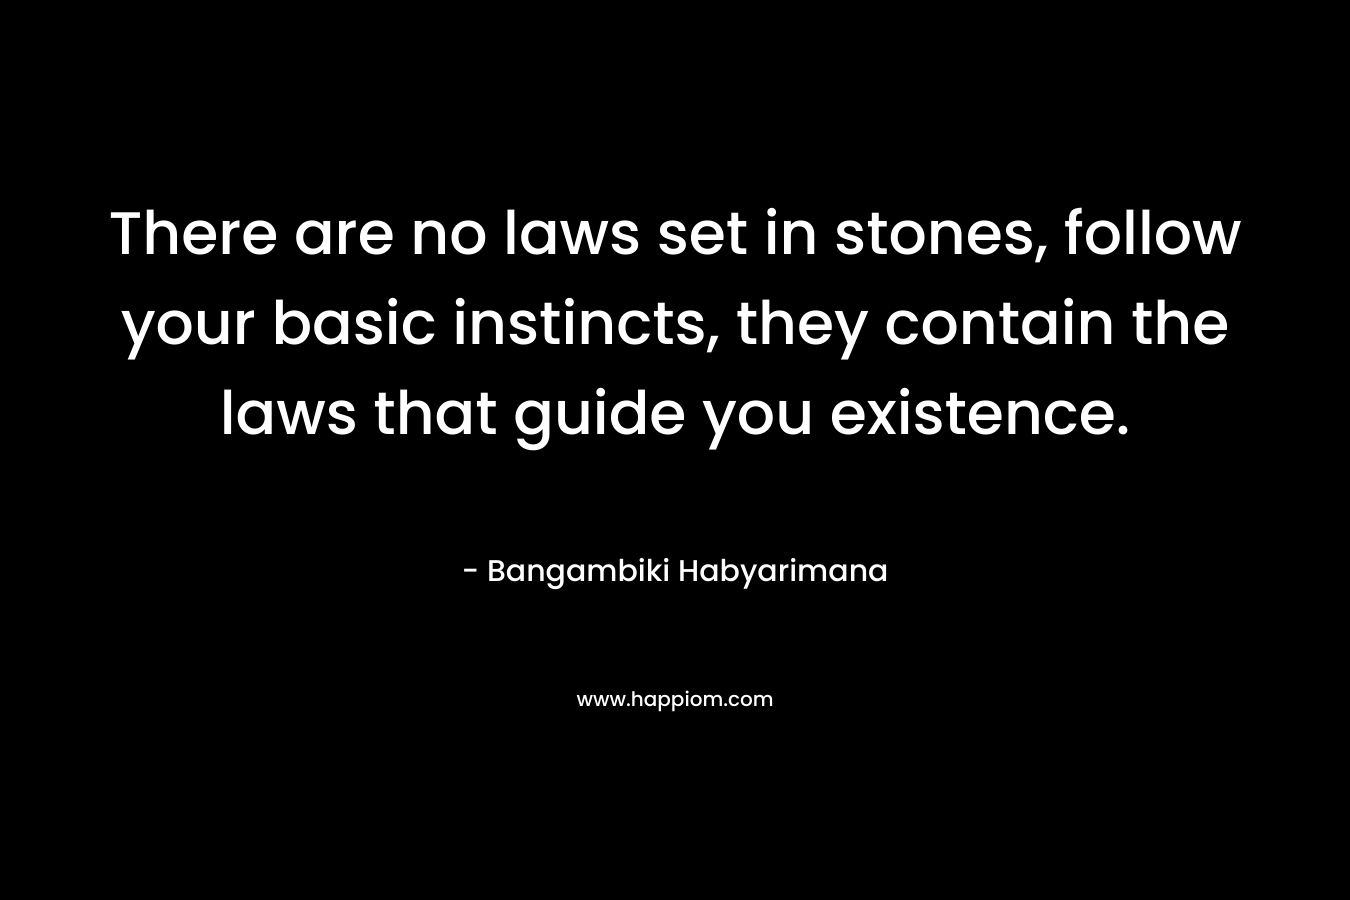 There are no laws set in stones, follow your basic instincts, they contain the laws that guide you existence. – Bangambiki Habyarimana